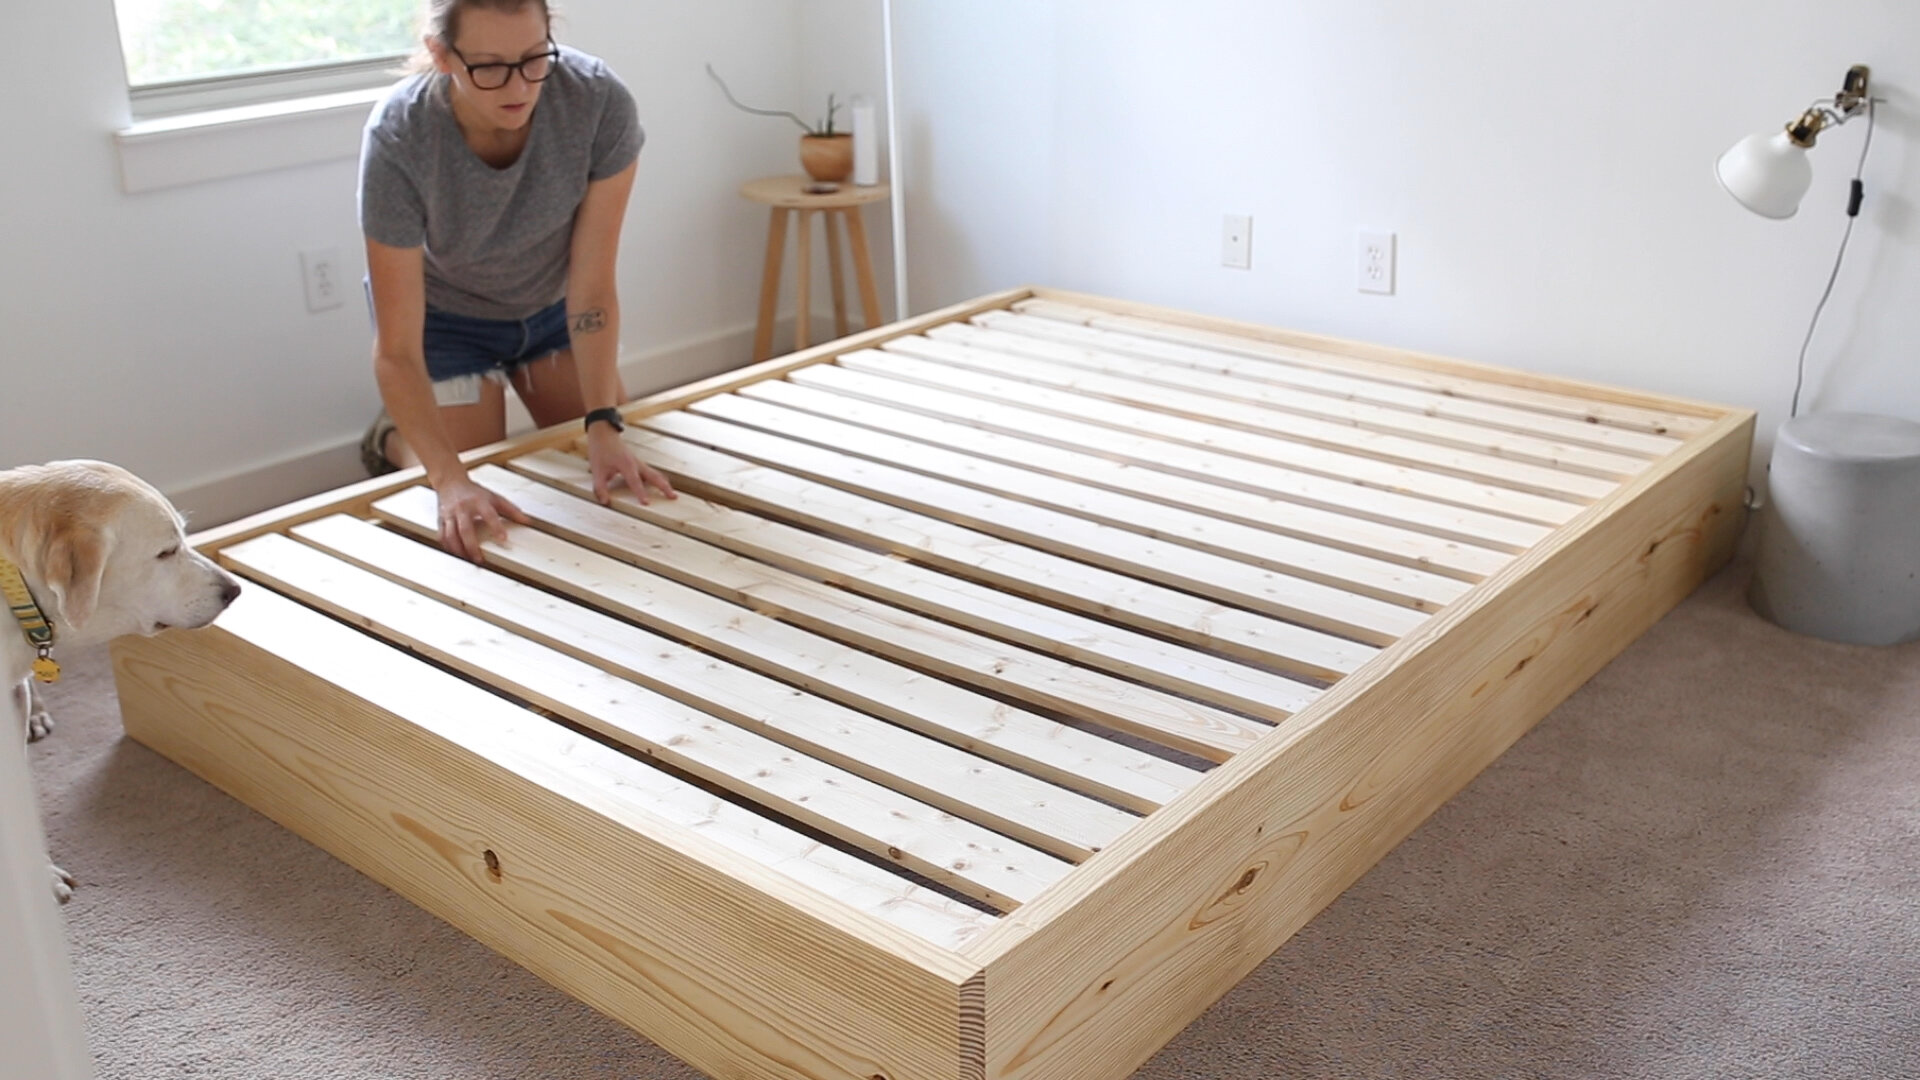 How To Build An Easy Bed Platform, How To Make A Platform Queen Bed Frame